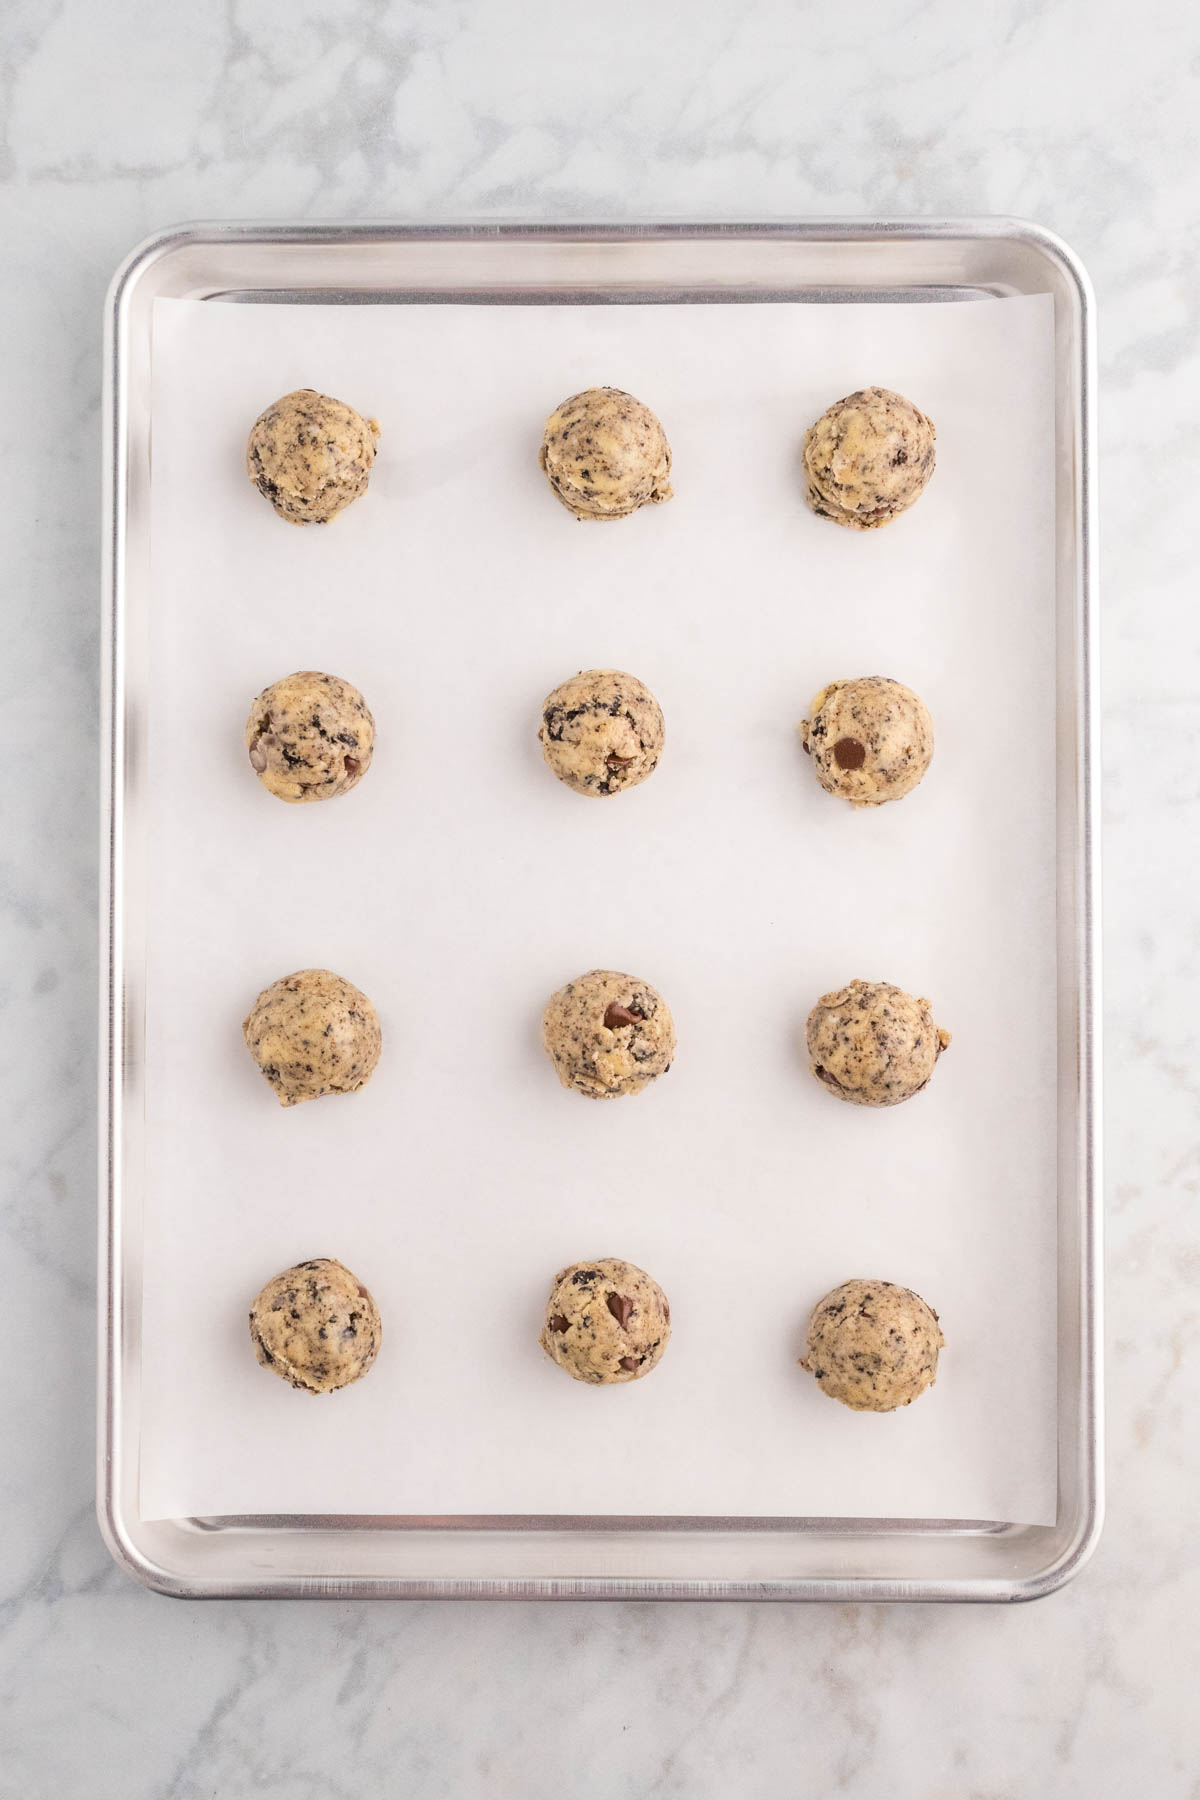 Raw cookie dough balls evenly spaced on a baking sheet lined with parchment paper.